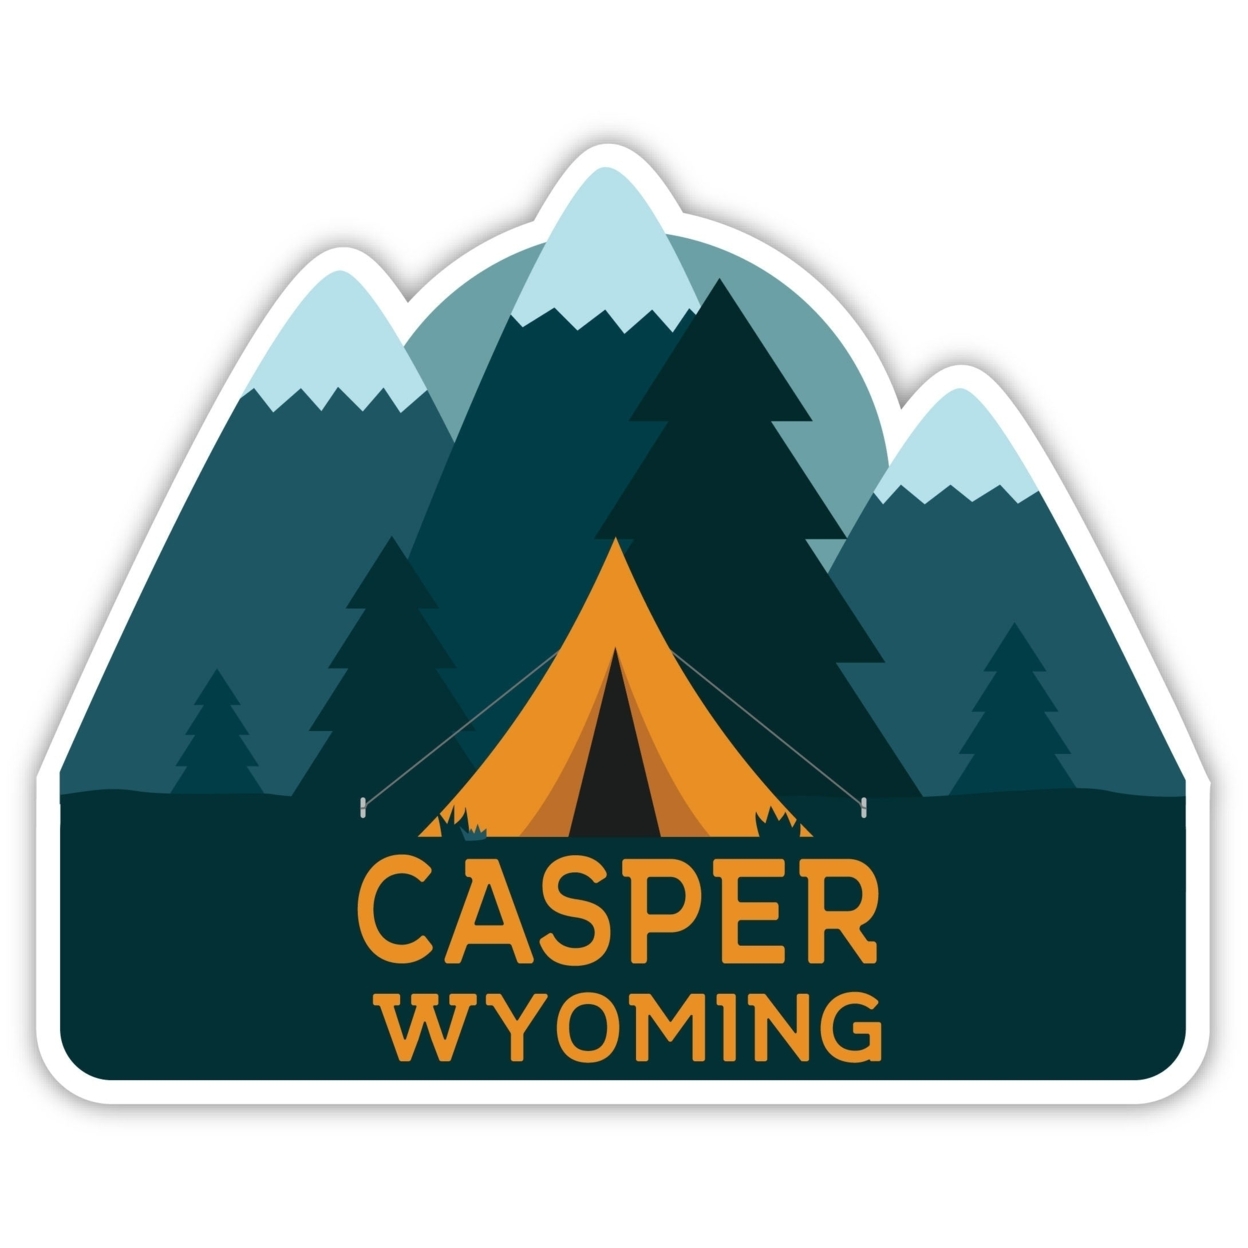 Casper Wyoming Souvenir Decorative Stickers (Choose Theme And Size) - Single Unit, 8-Inch, Great Outdoors